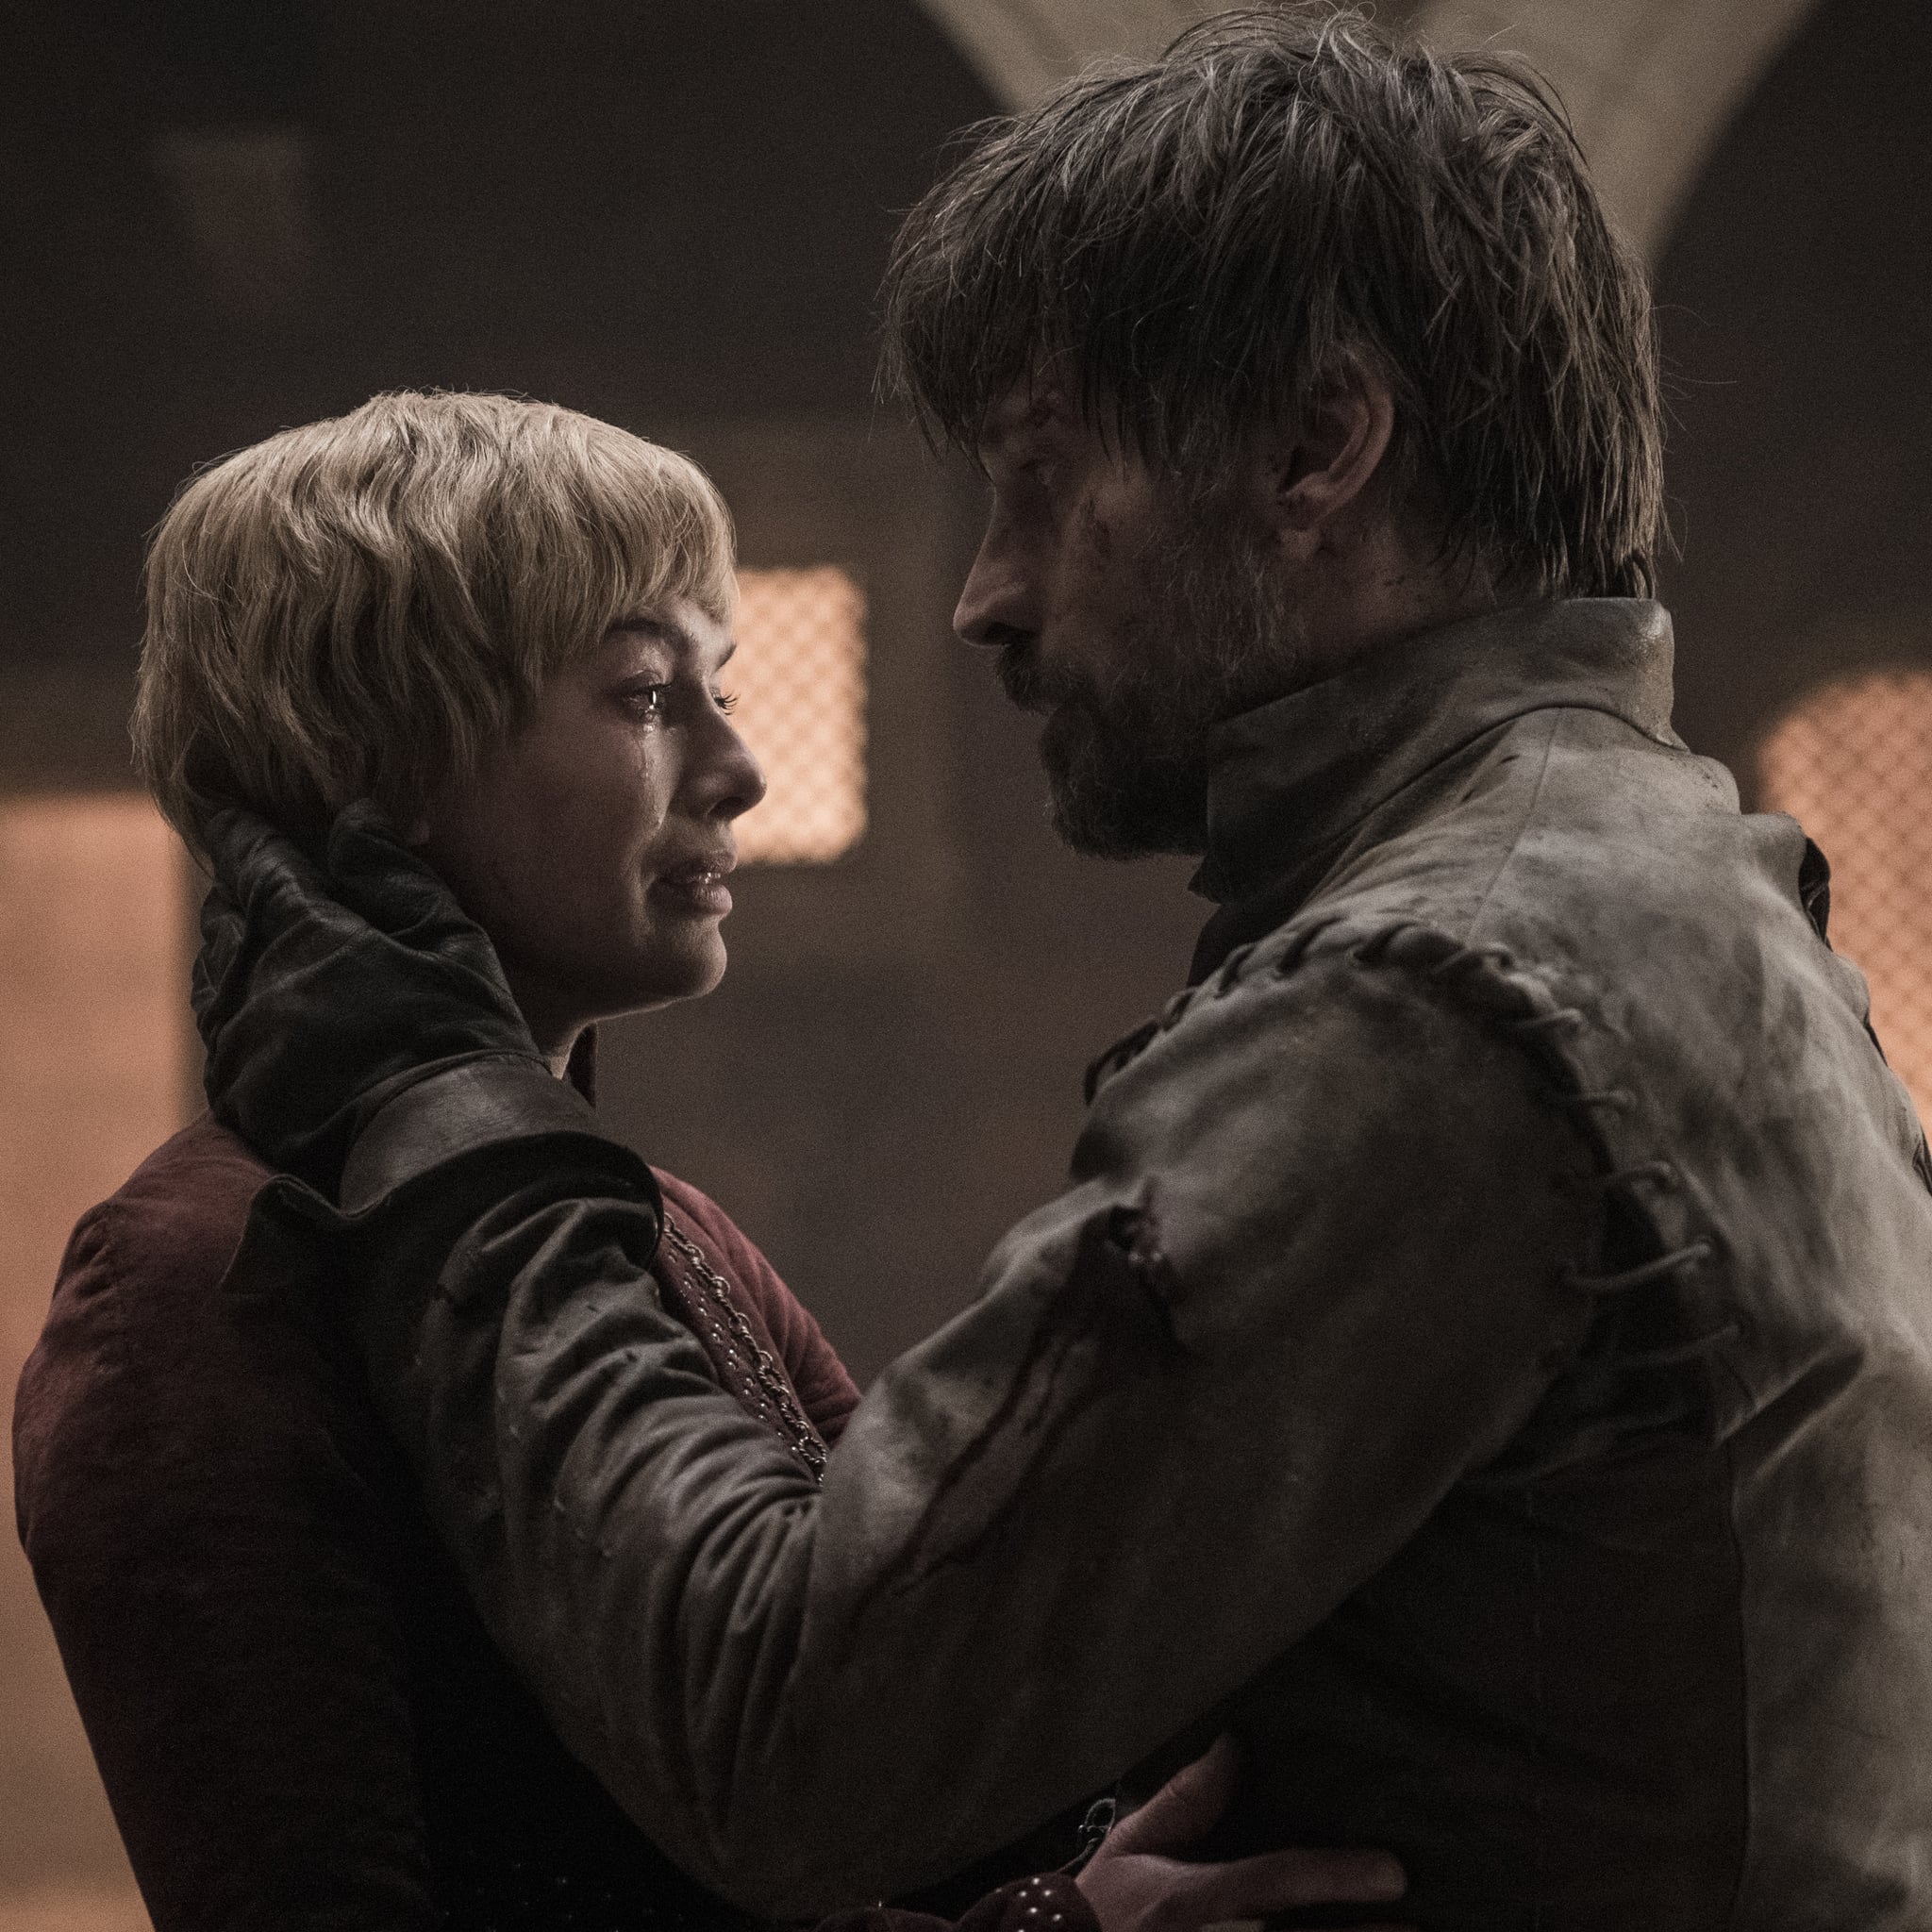 Jaime returned to Cersei in the final Game of Thrones season